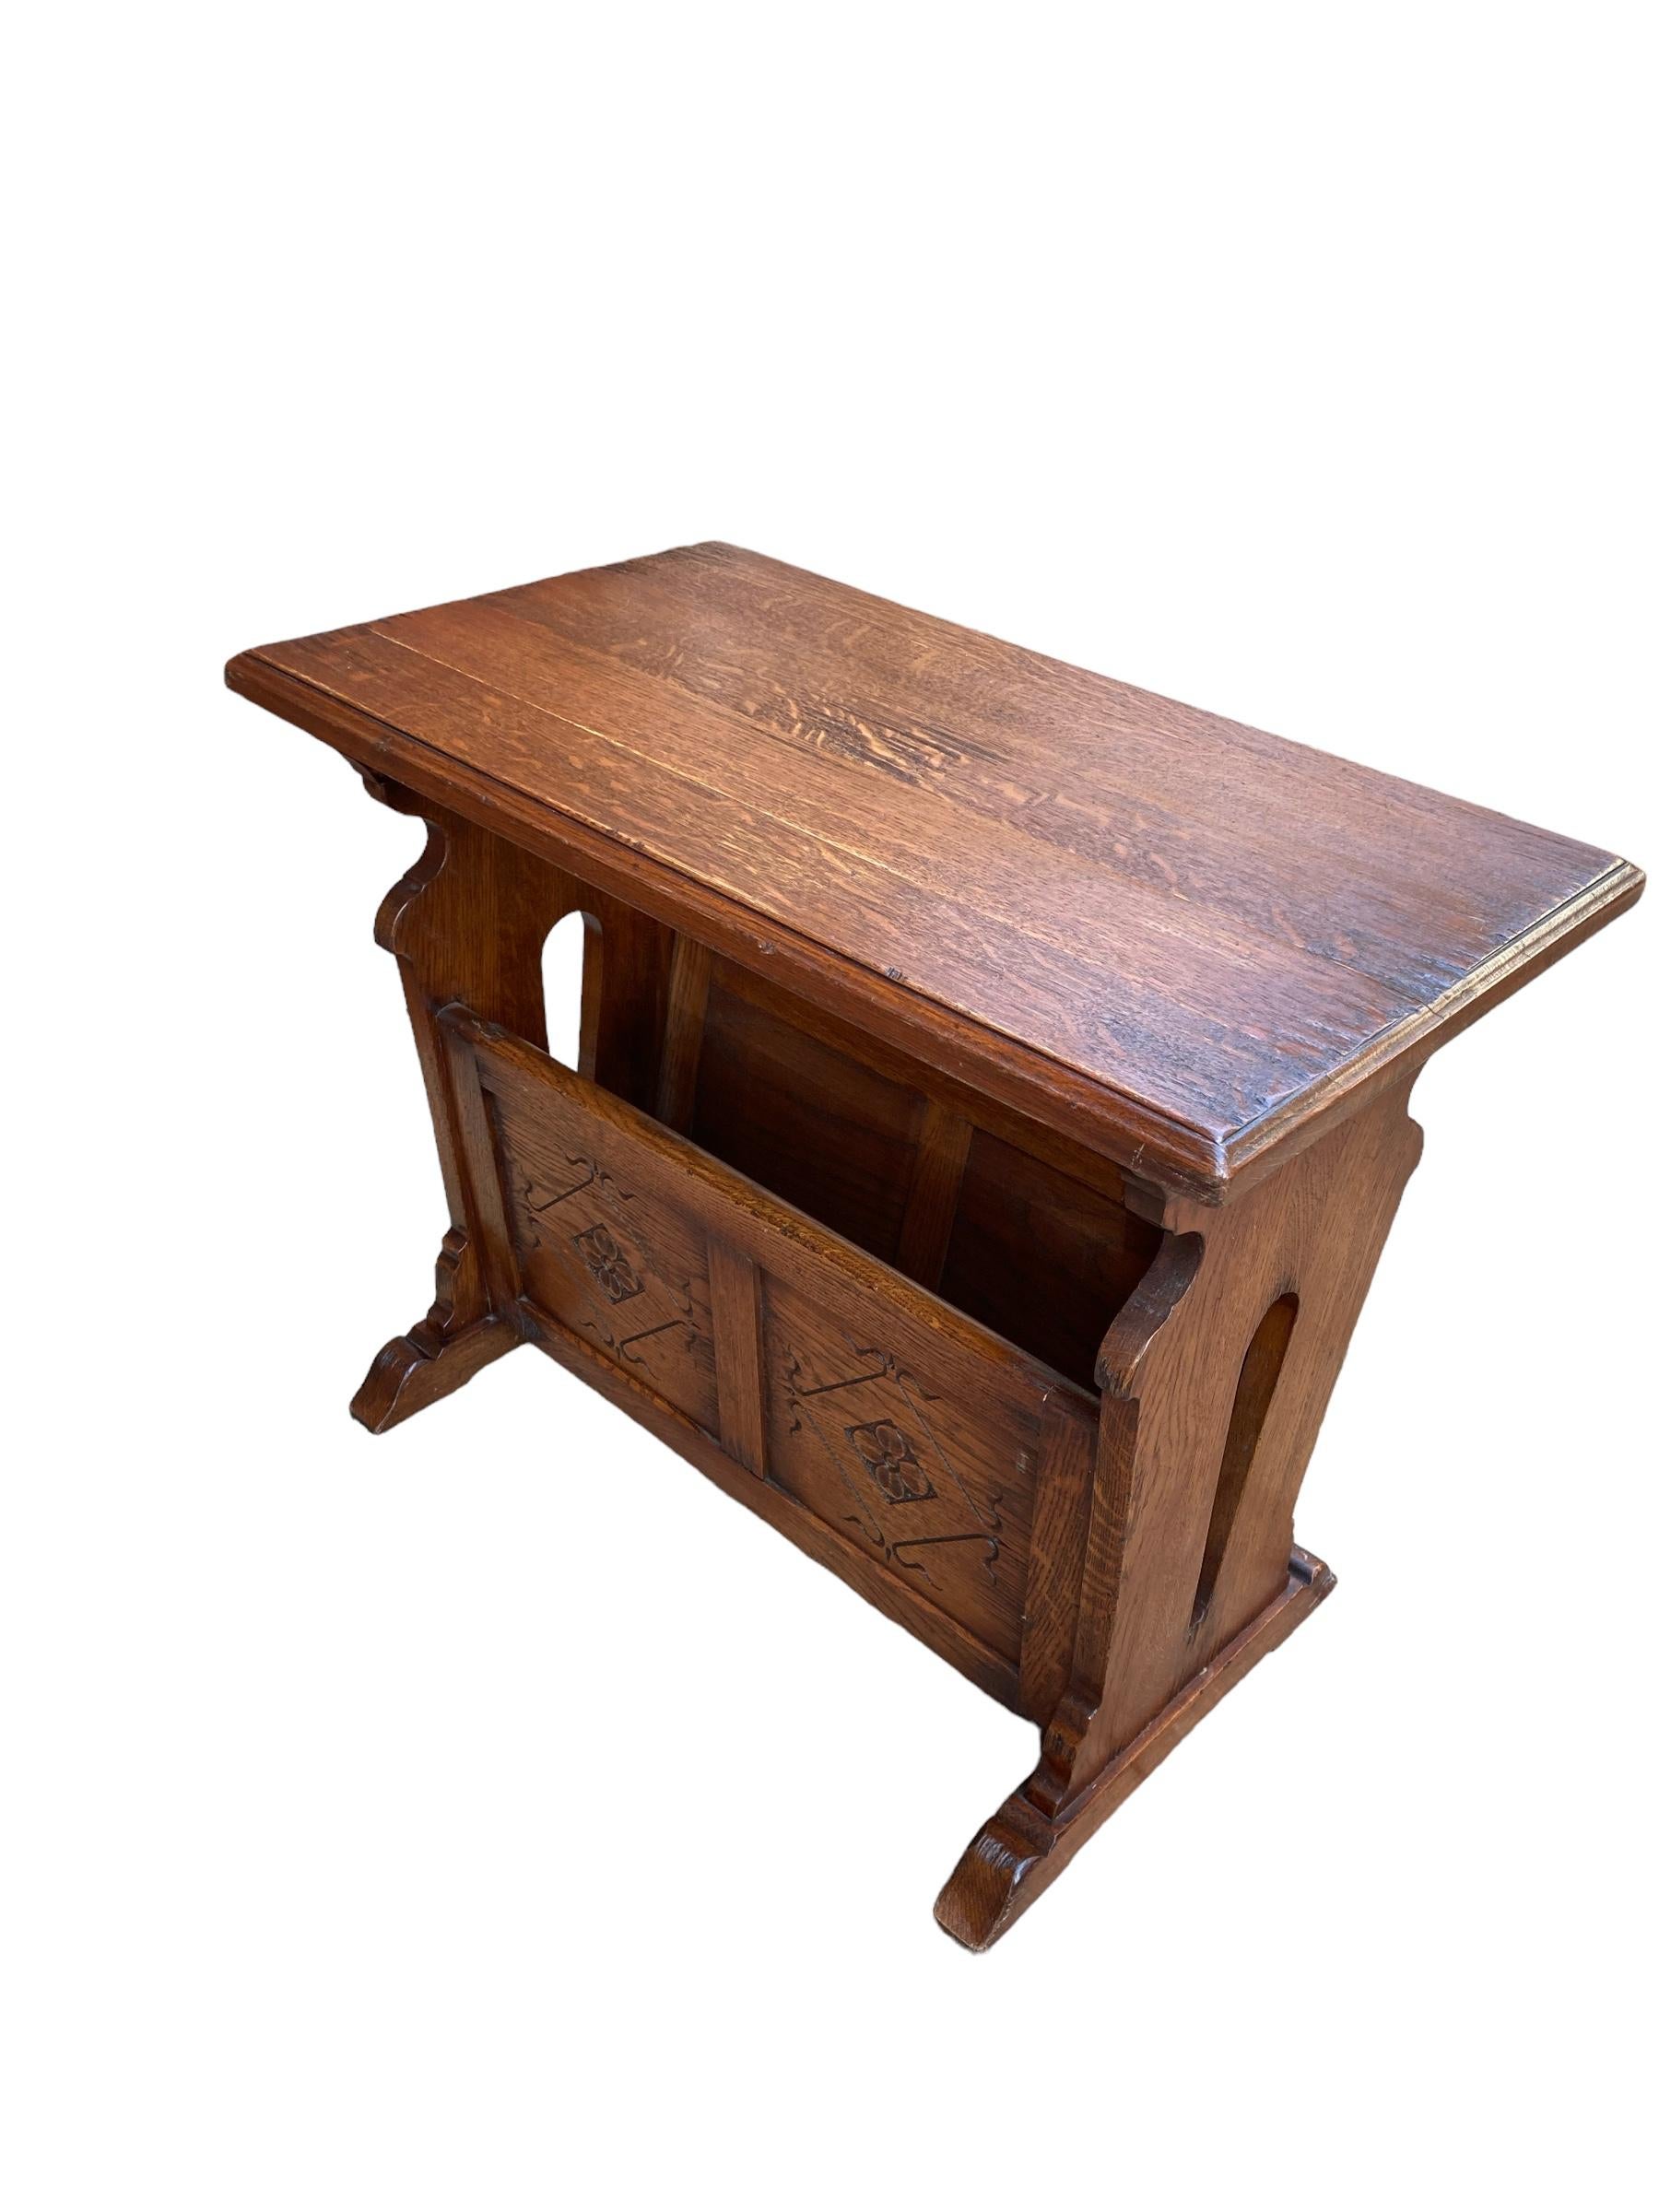 Old Charm Carved Oak small side table Magazine Rack. The tops raised on shaped ends joined with side planks with a simple carved Rose detail, which form a useful magazine or book holder as well as a handy small coffee or side table. Raised on